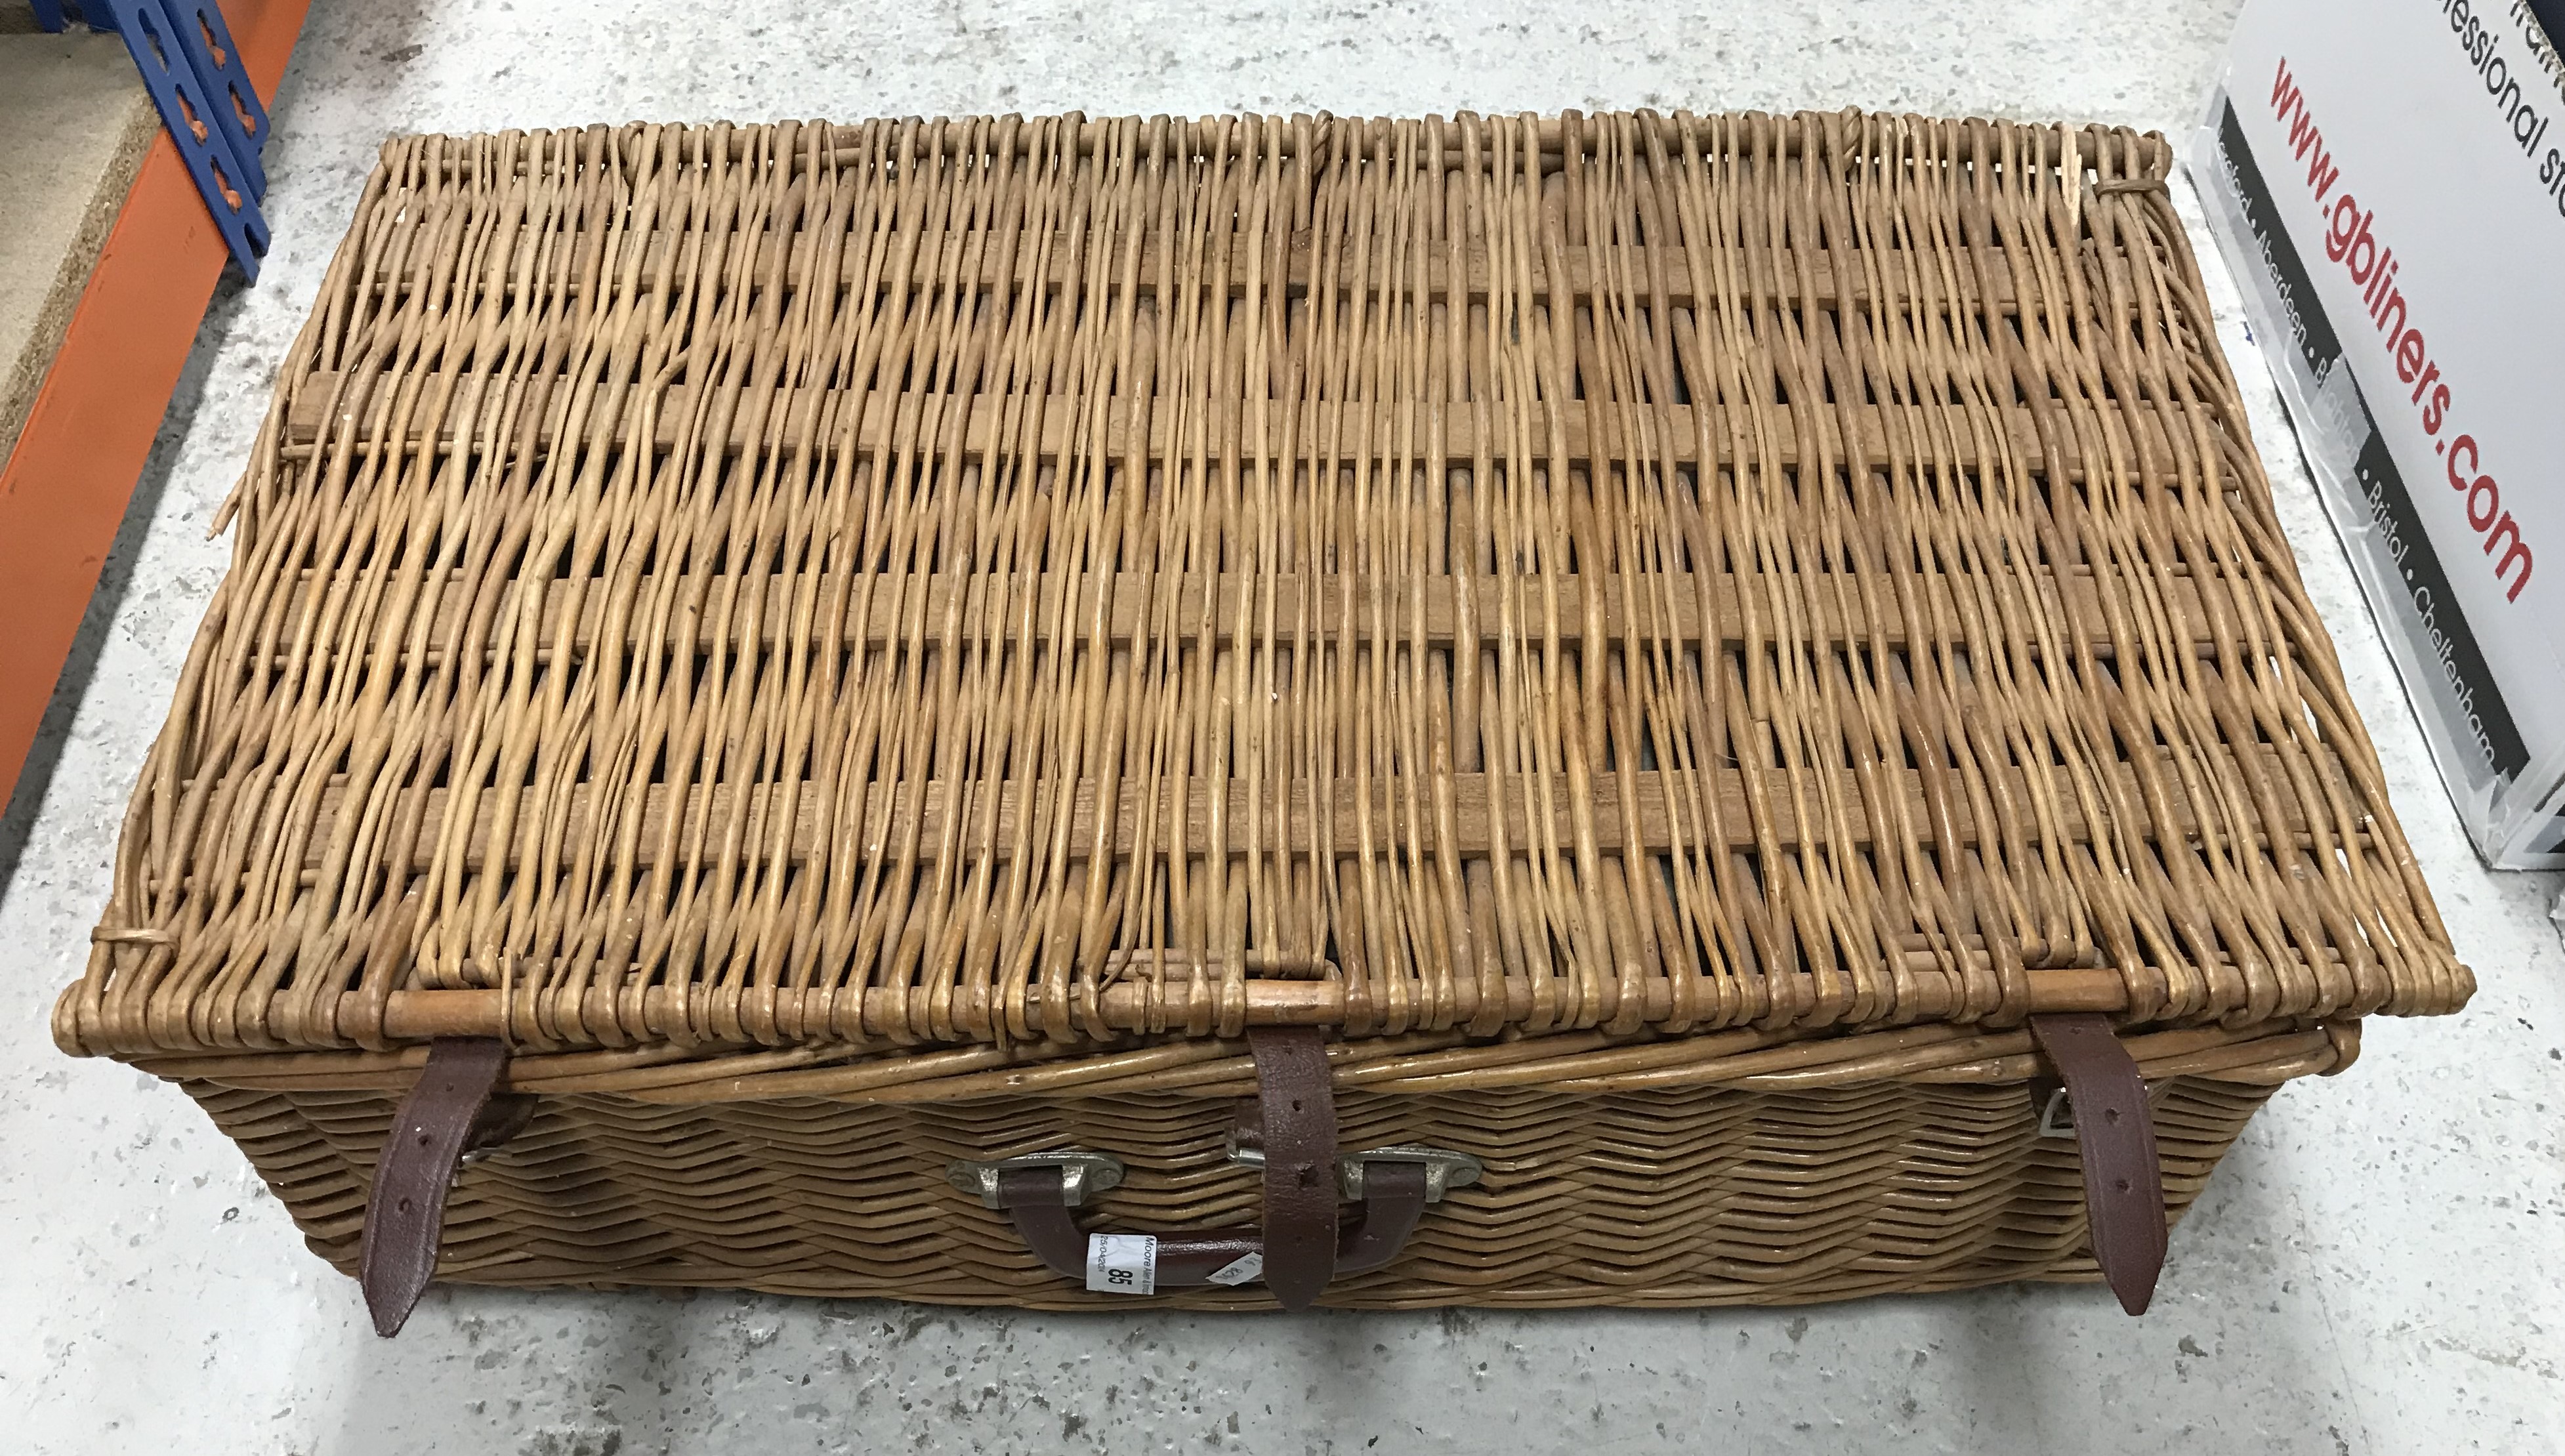 A cane picnic basket with fitted interior - Image 2 of 2